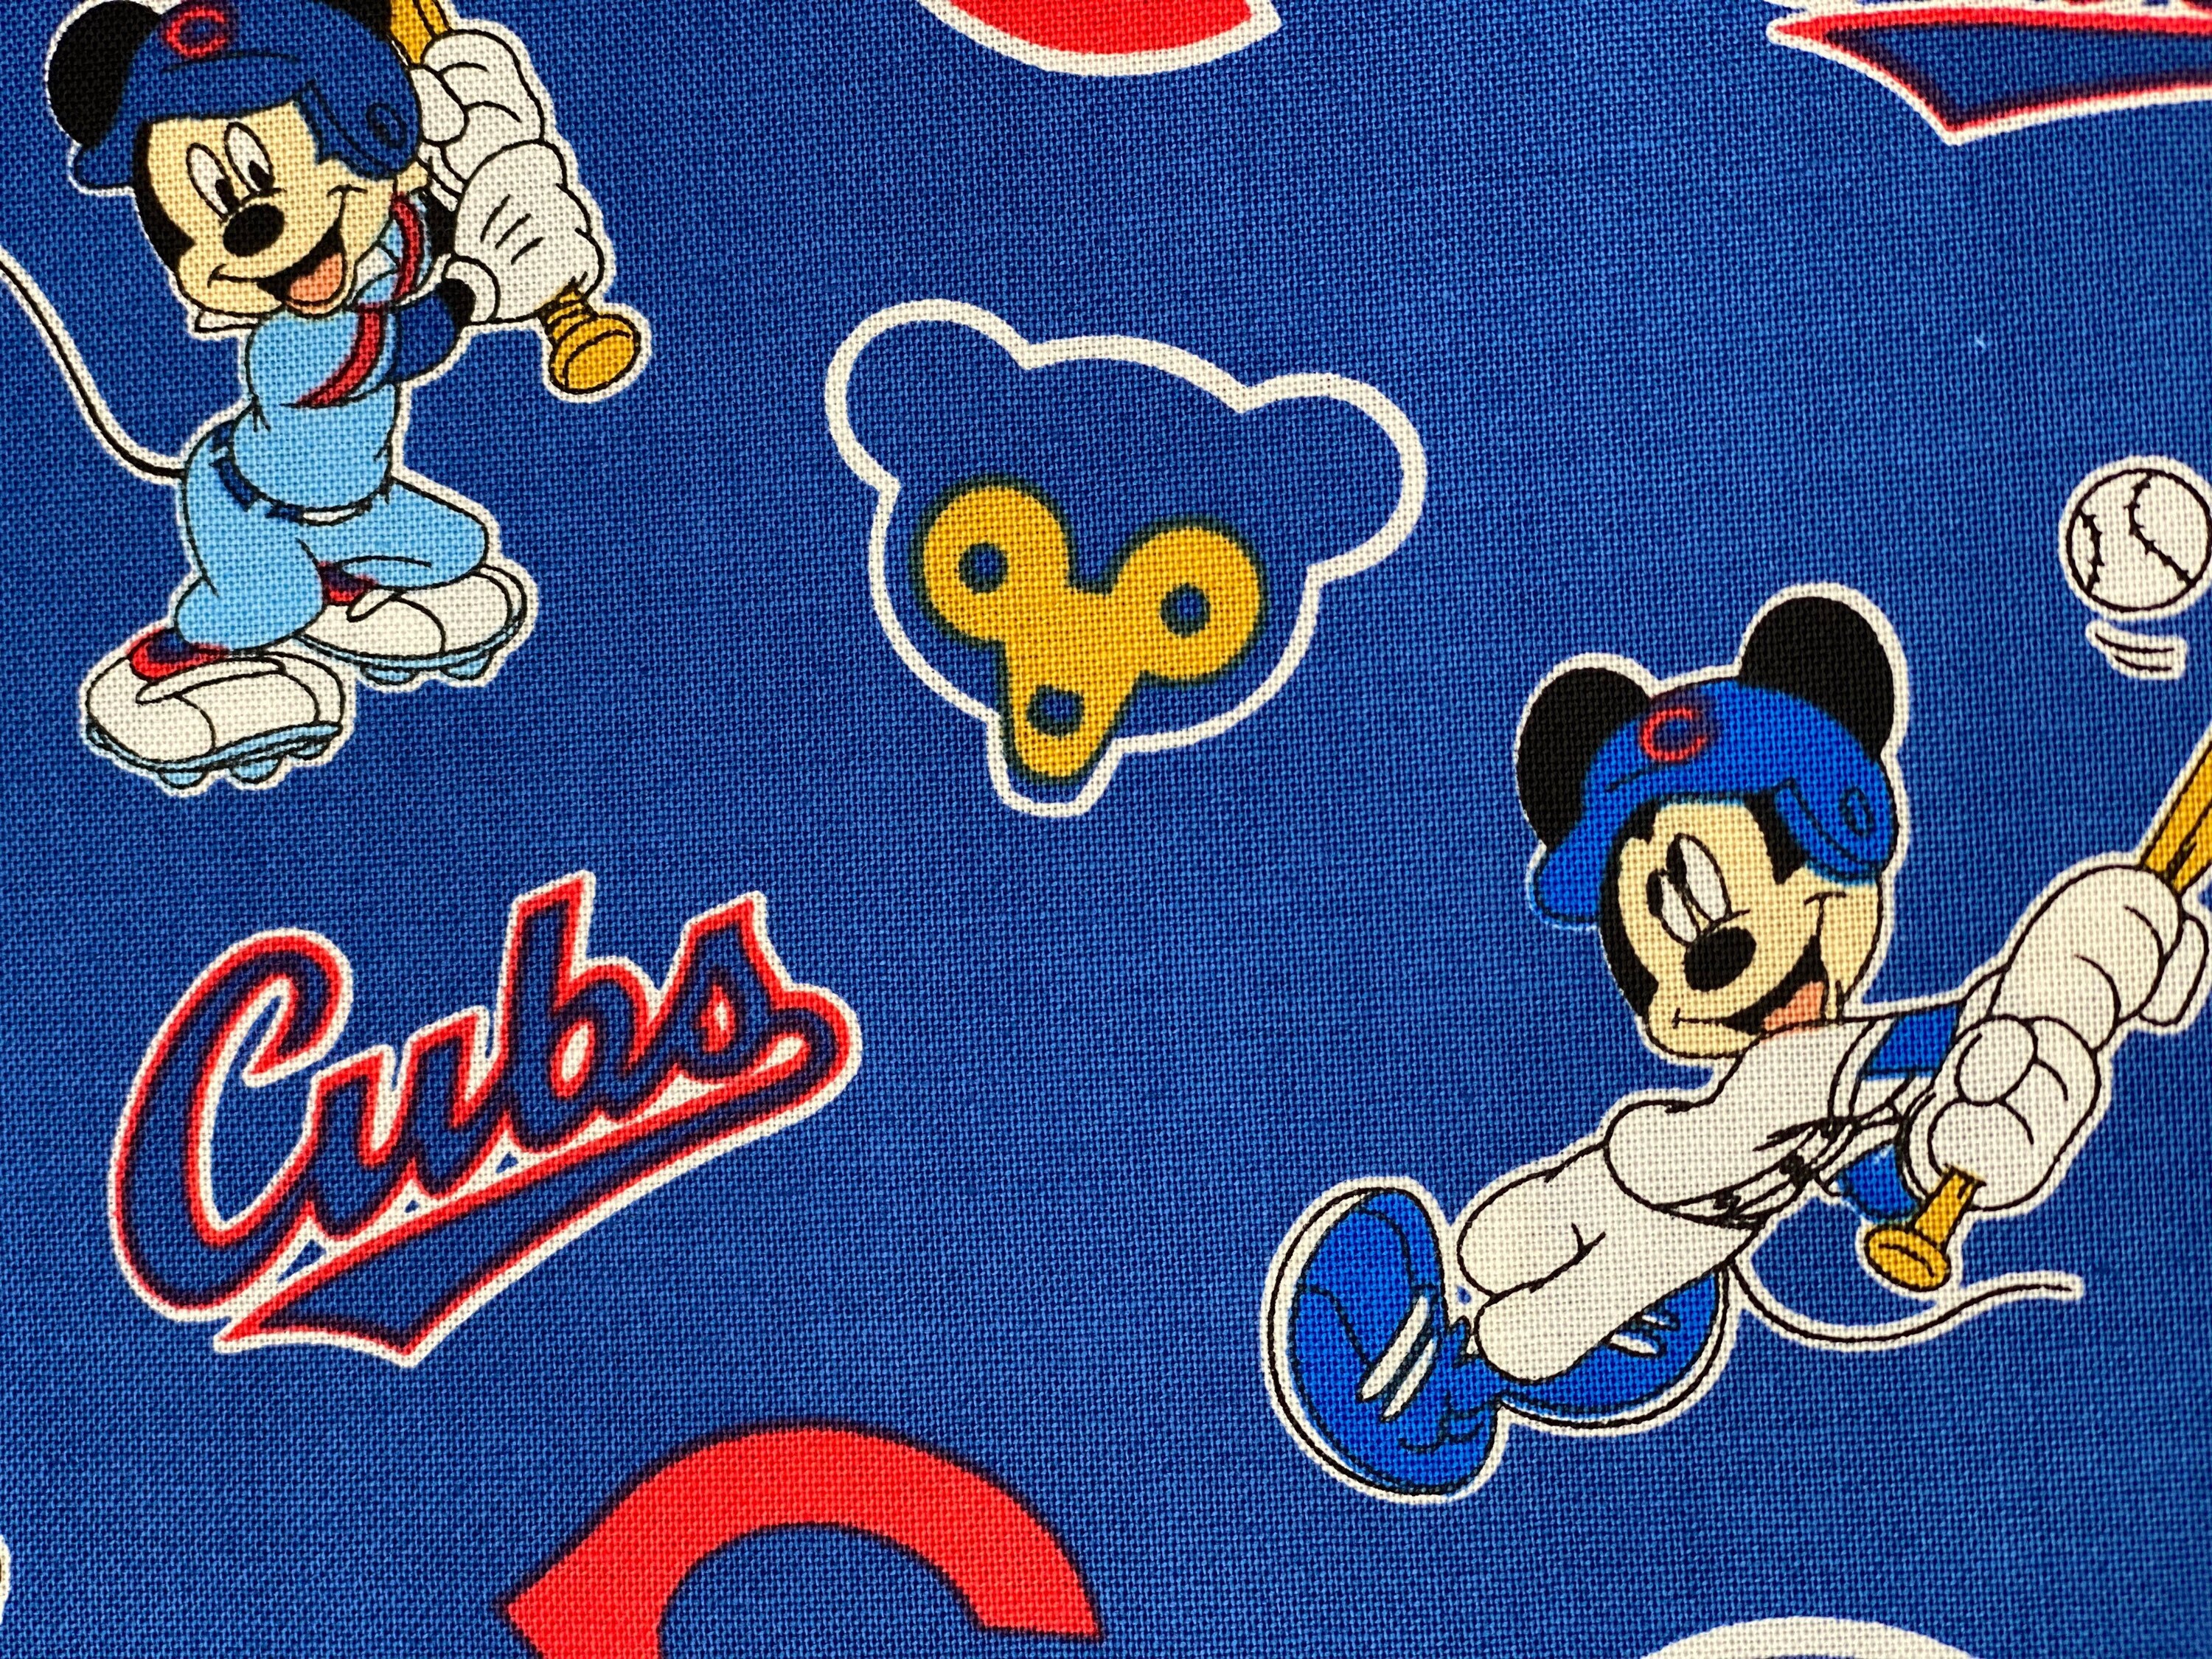 cubs mickey mouse